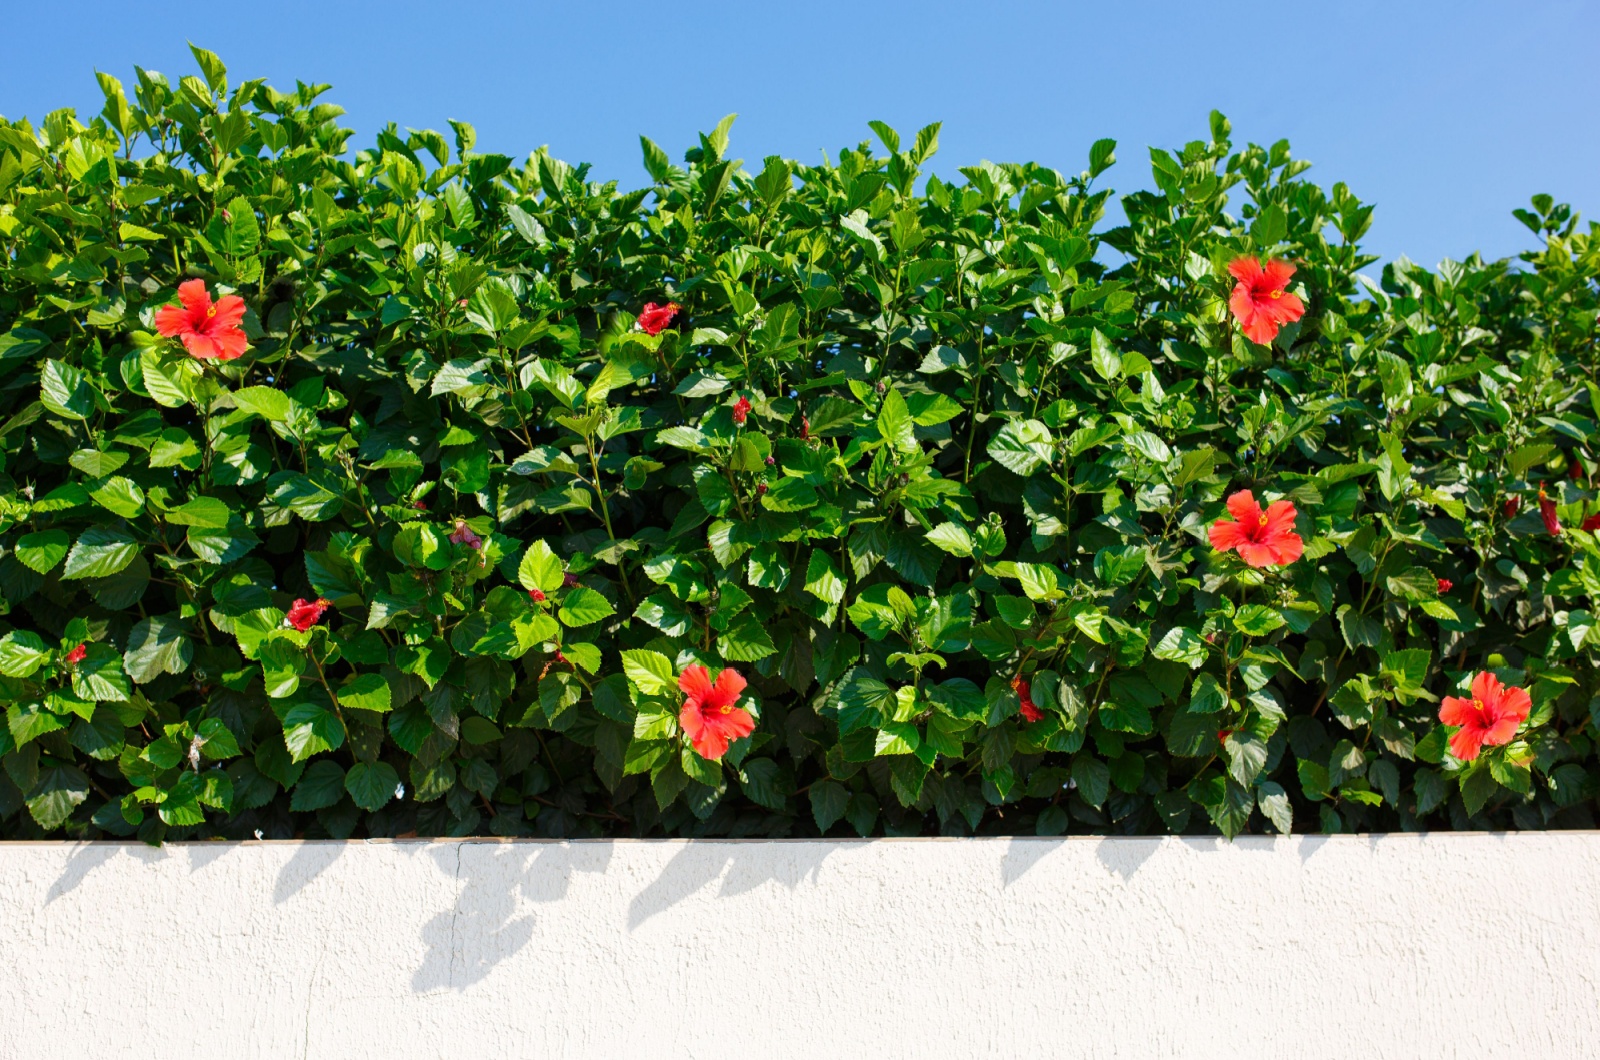 Bush green hedge with red hibiscus flowers